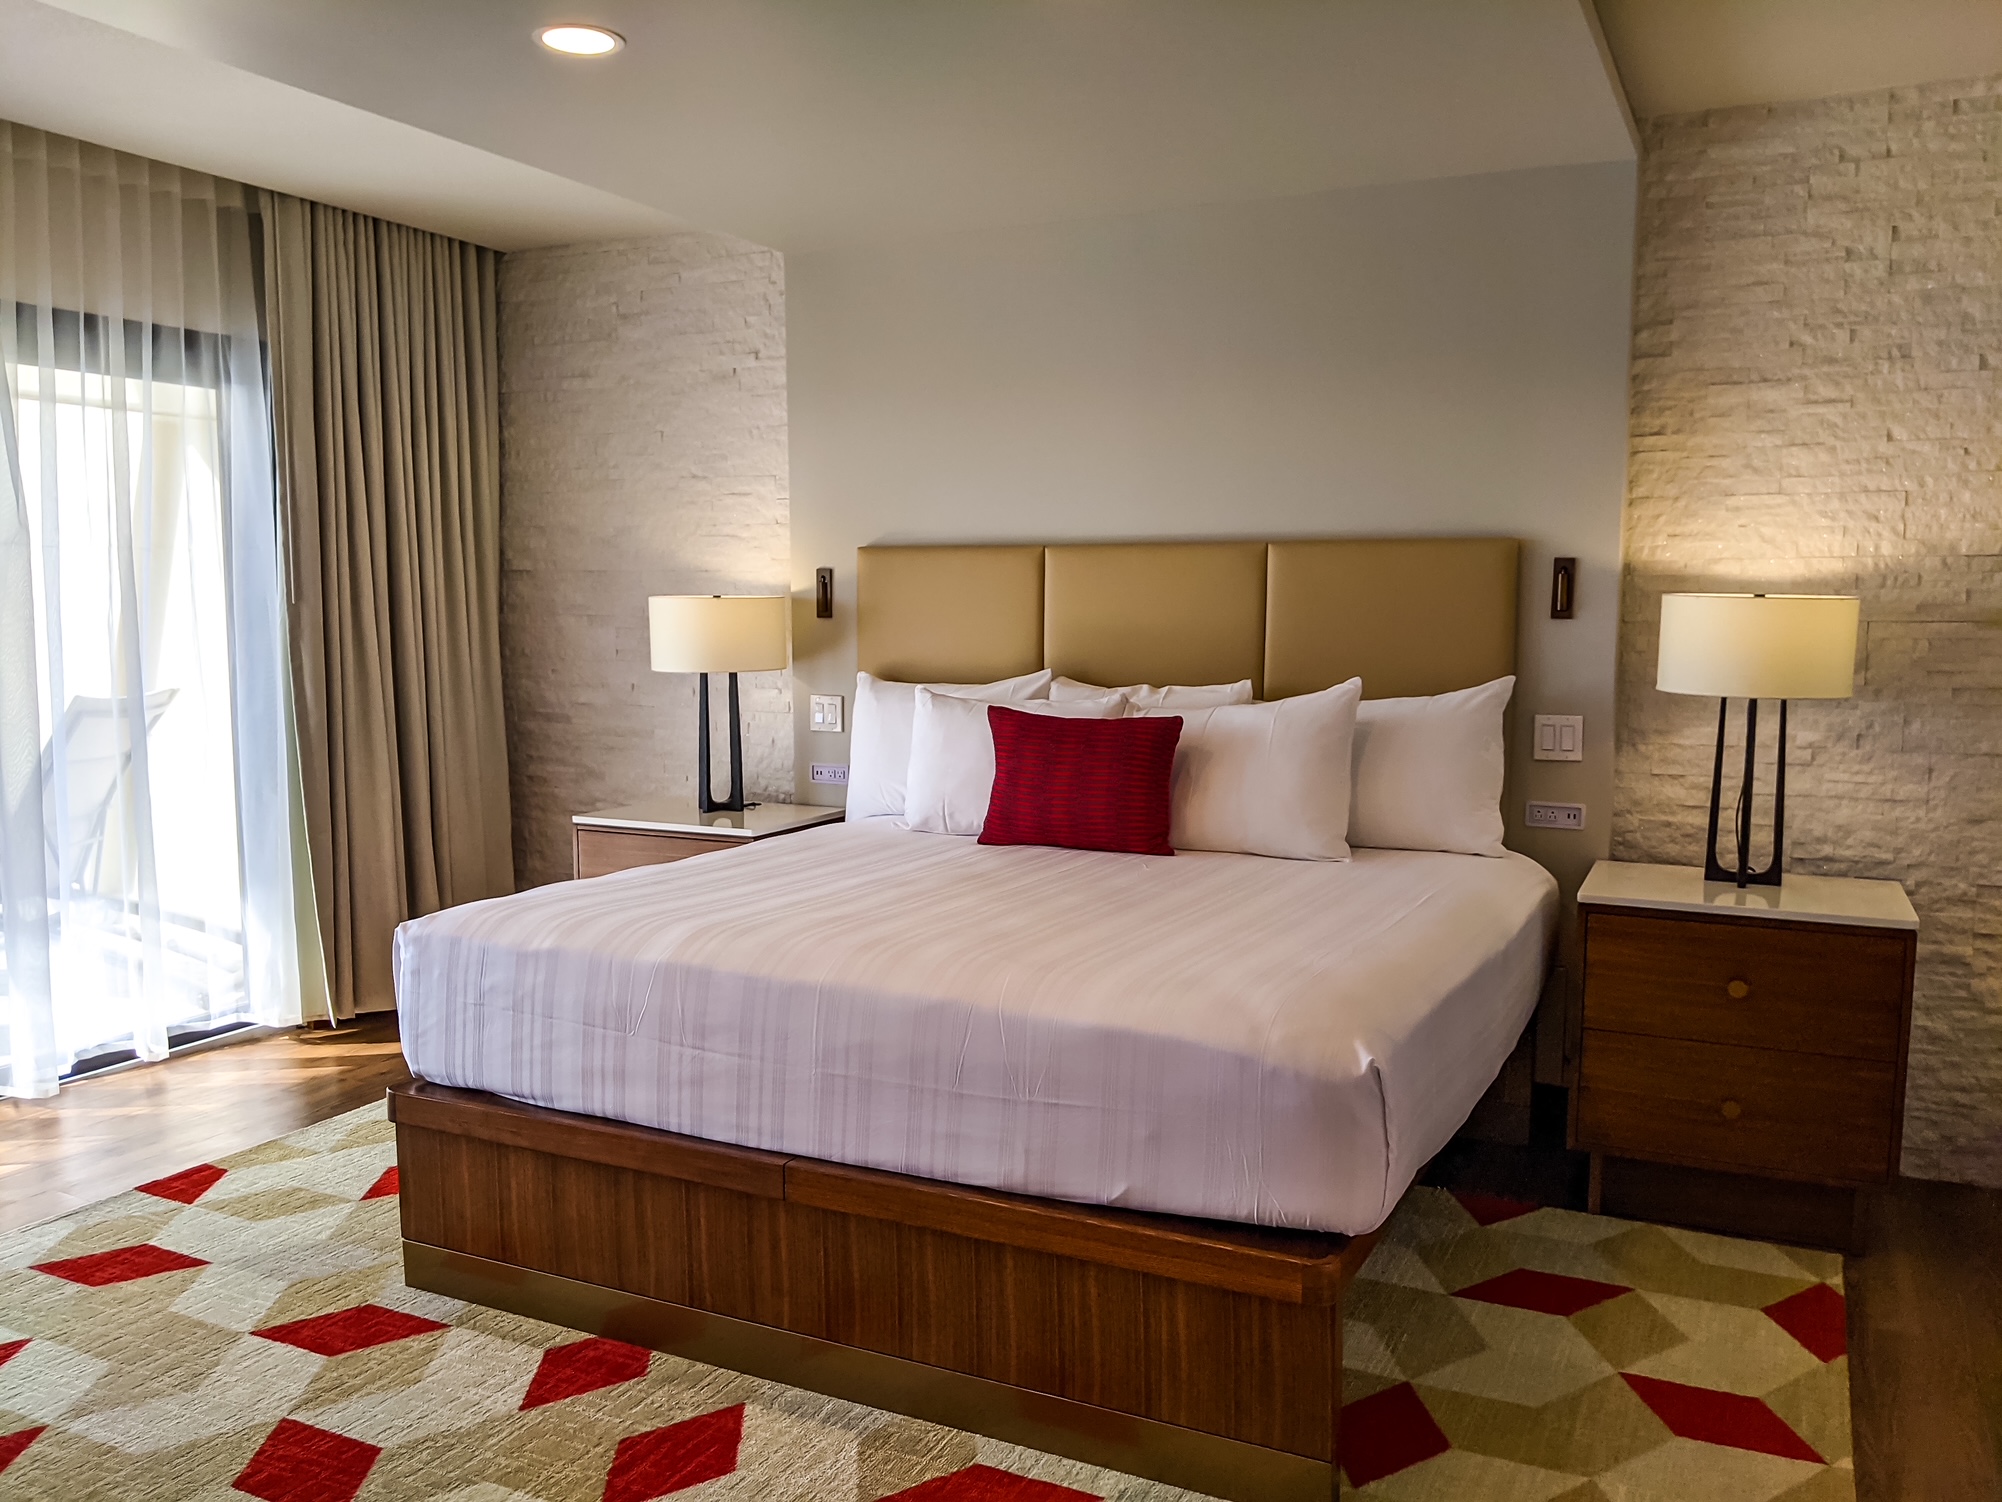 Presidential Suite at Contemporary Resort – King Bed | Wish Upon a Star ...